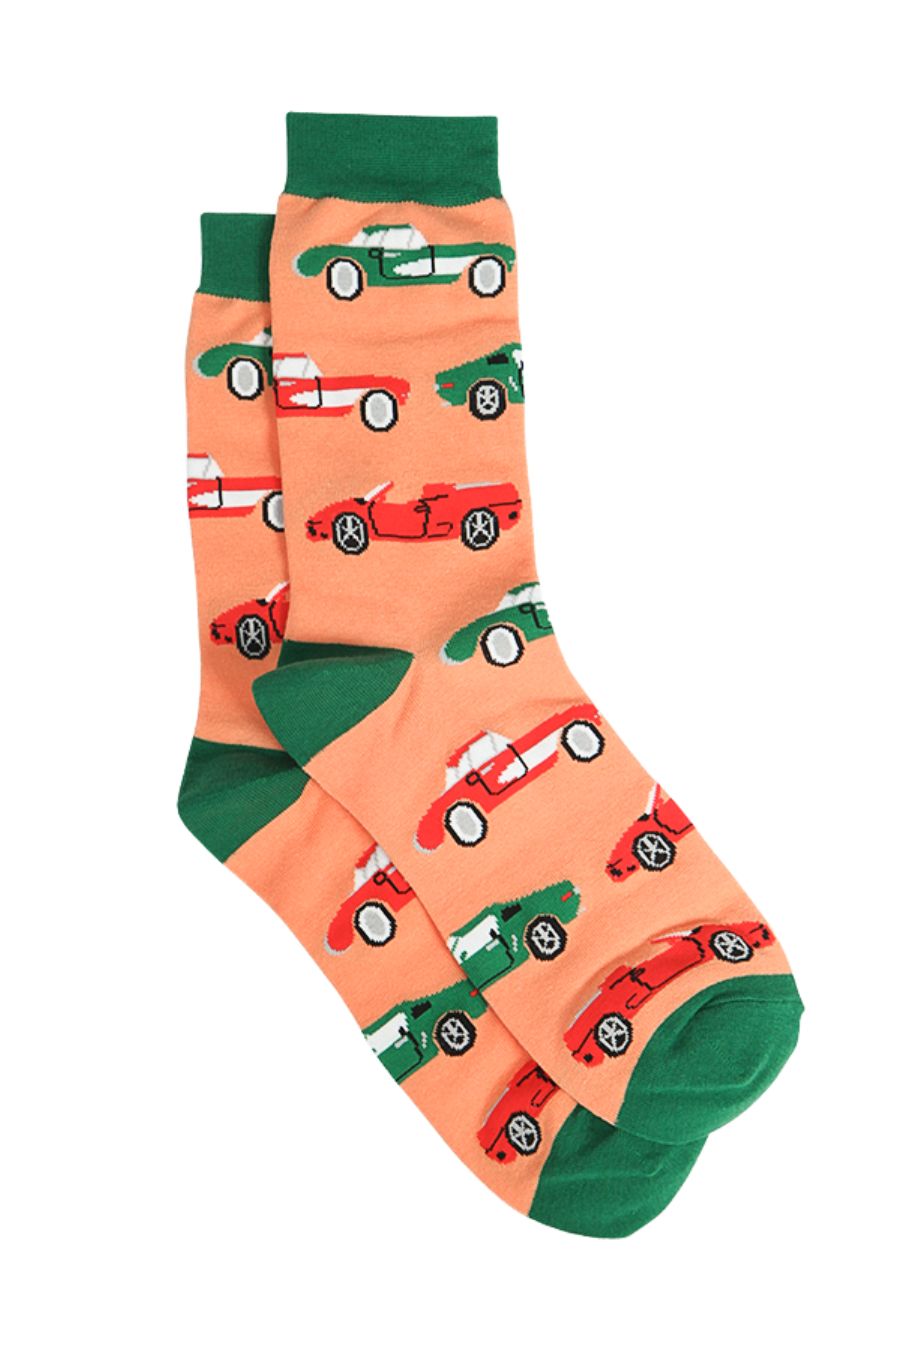 pastel orange socks with a green heel, toe and cuff with an all over pattern of red and green sports cars